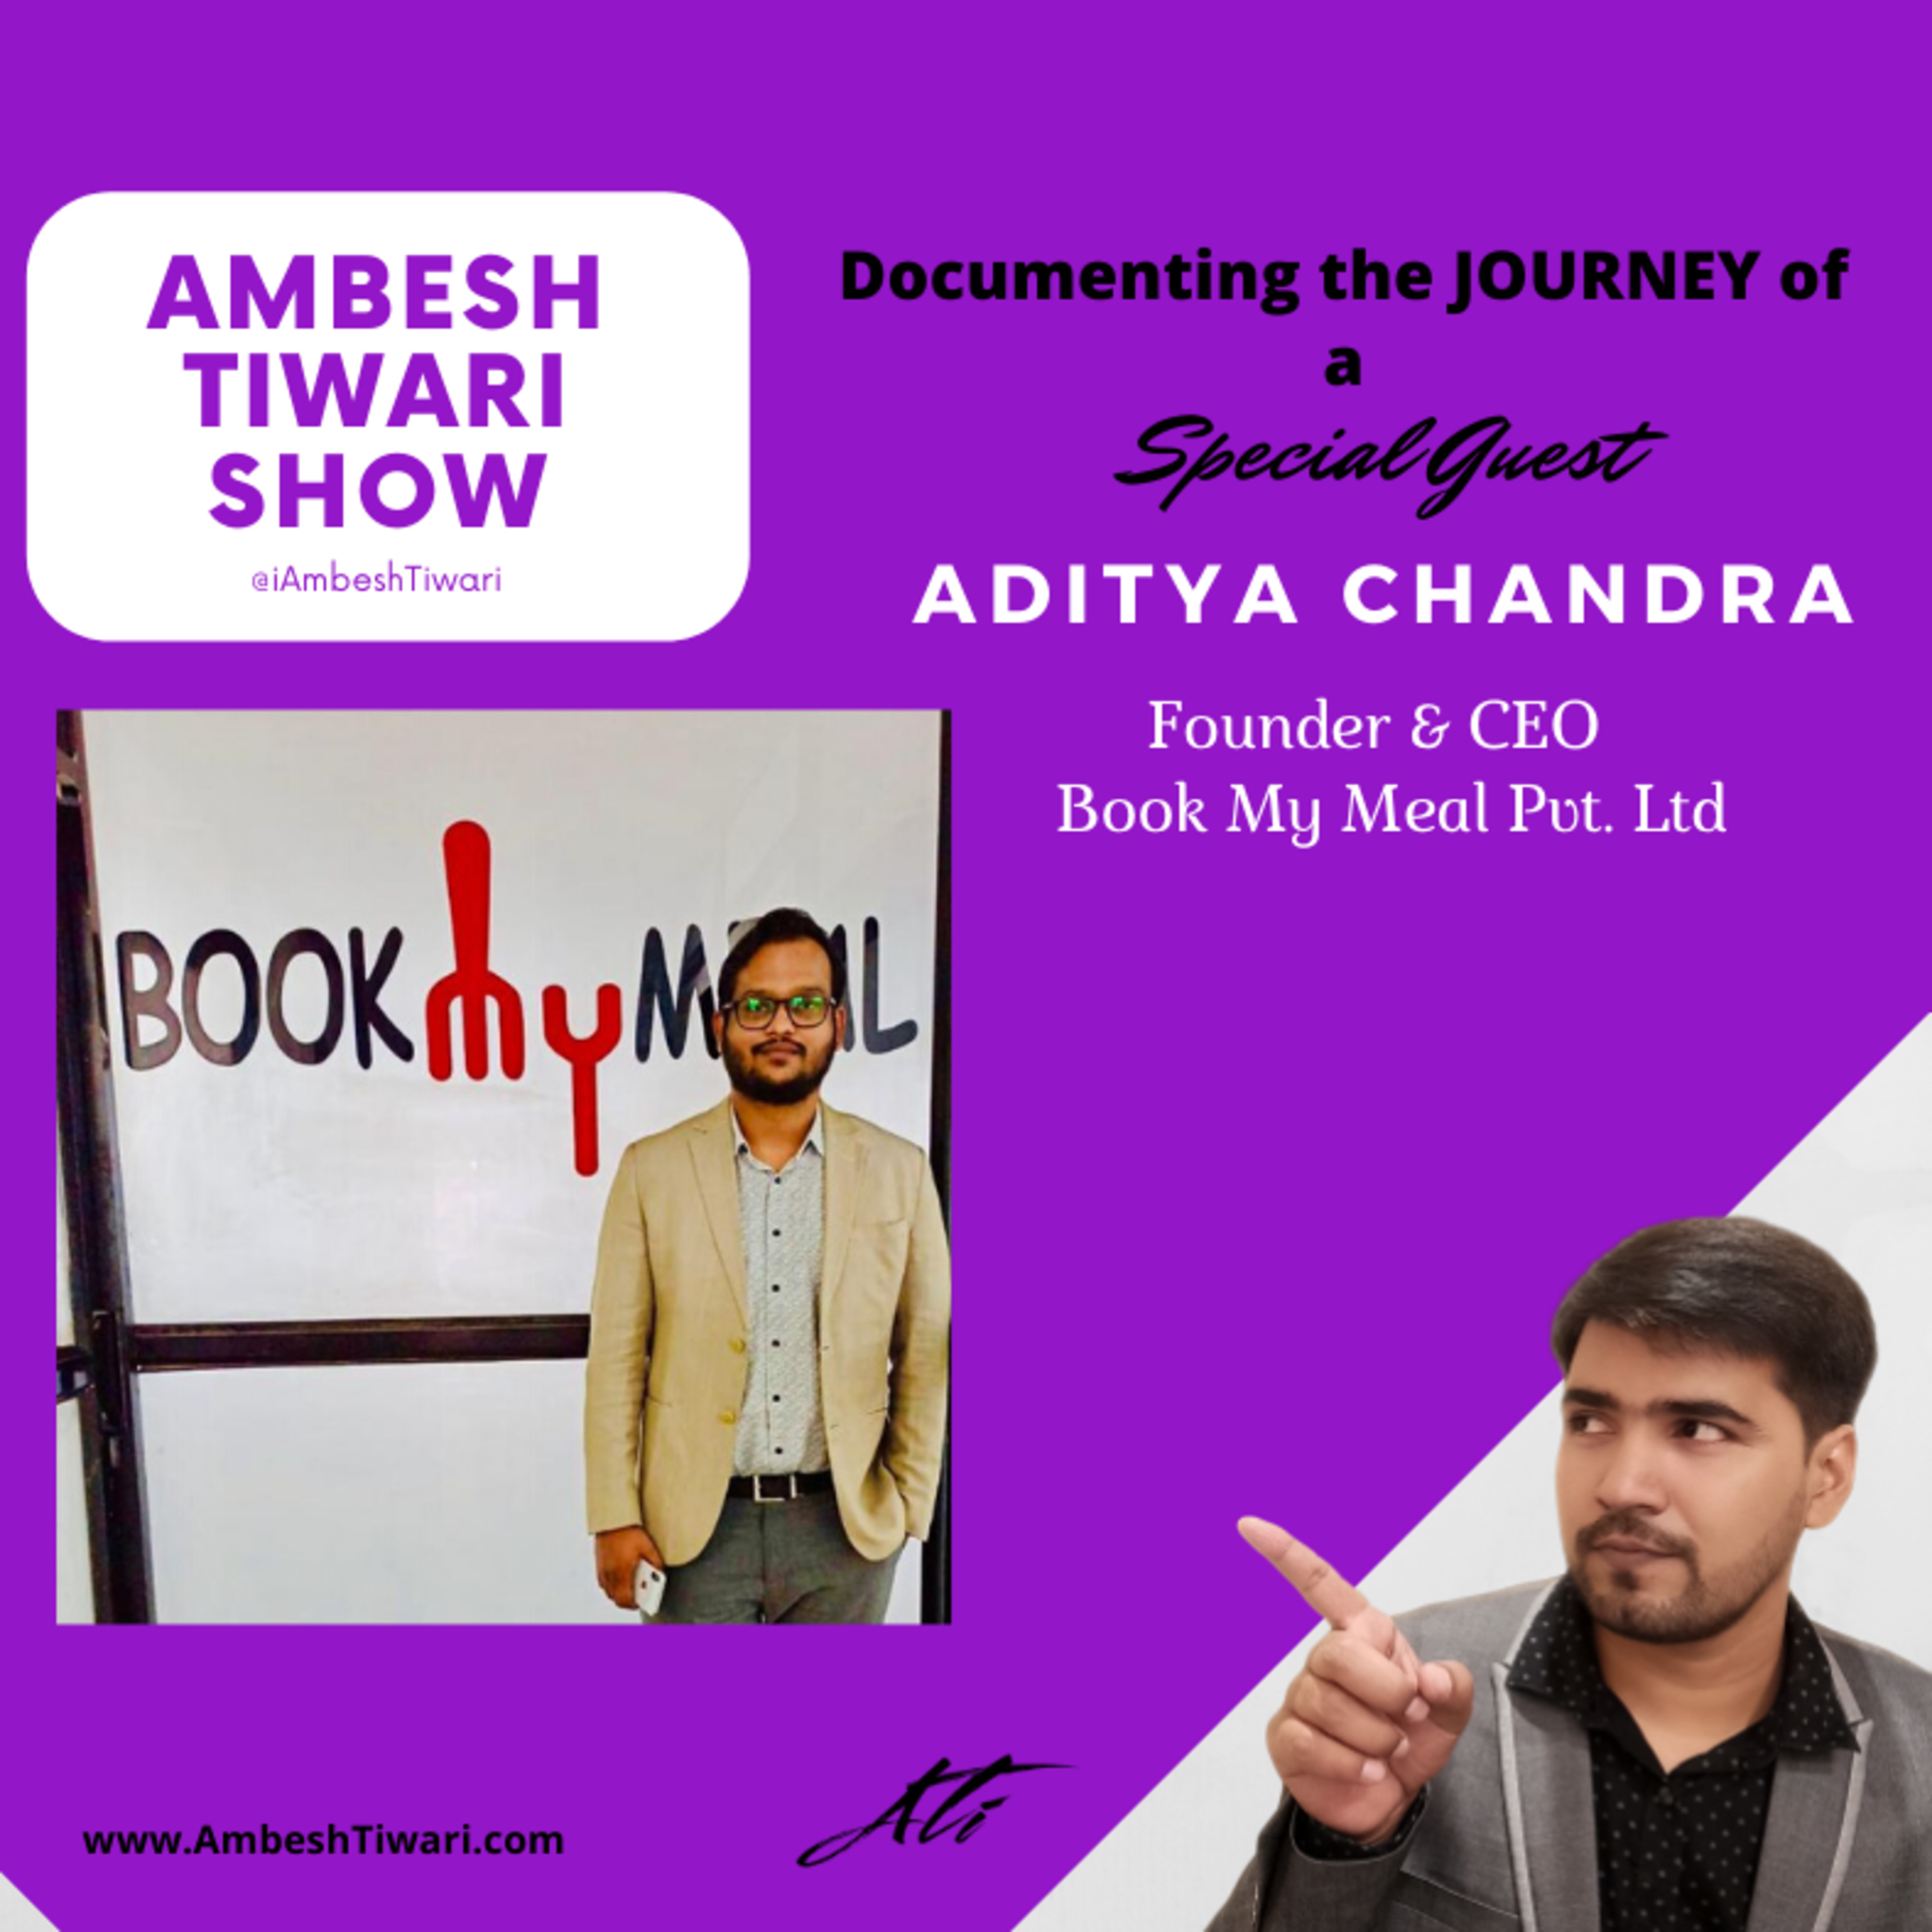 Interview with Aditya Chandra, Founder of BookmyMeal on Ambesh Tiwari Show